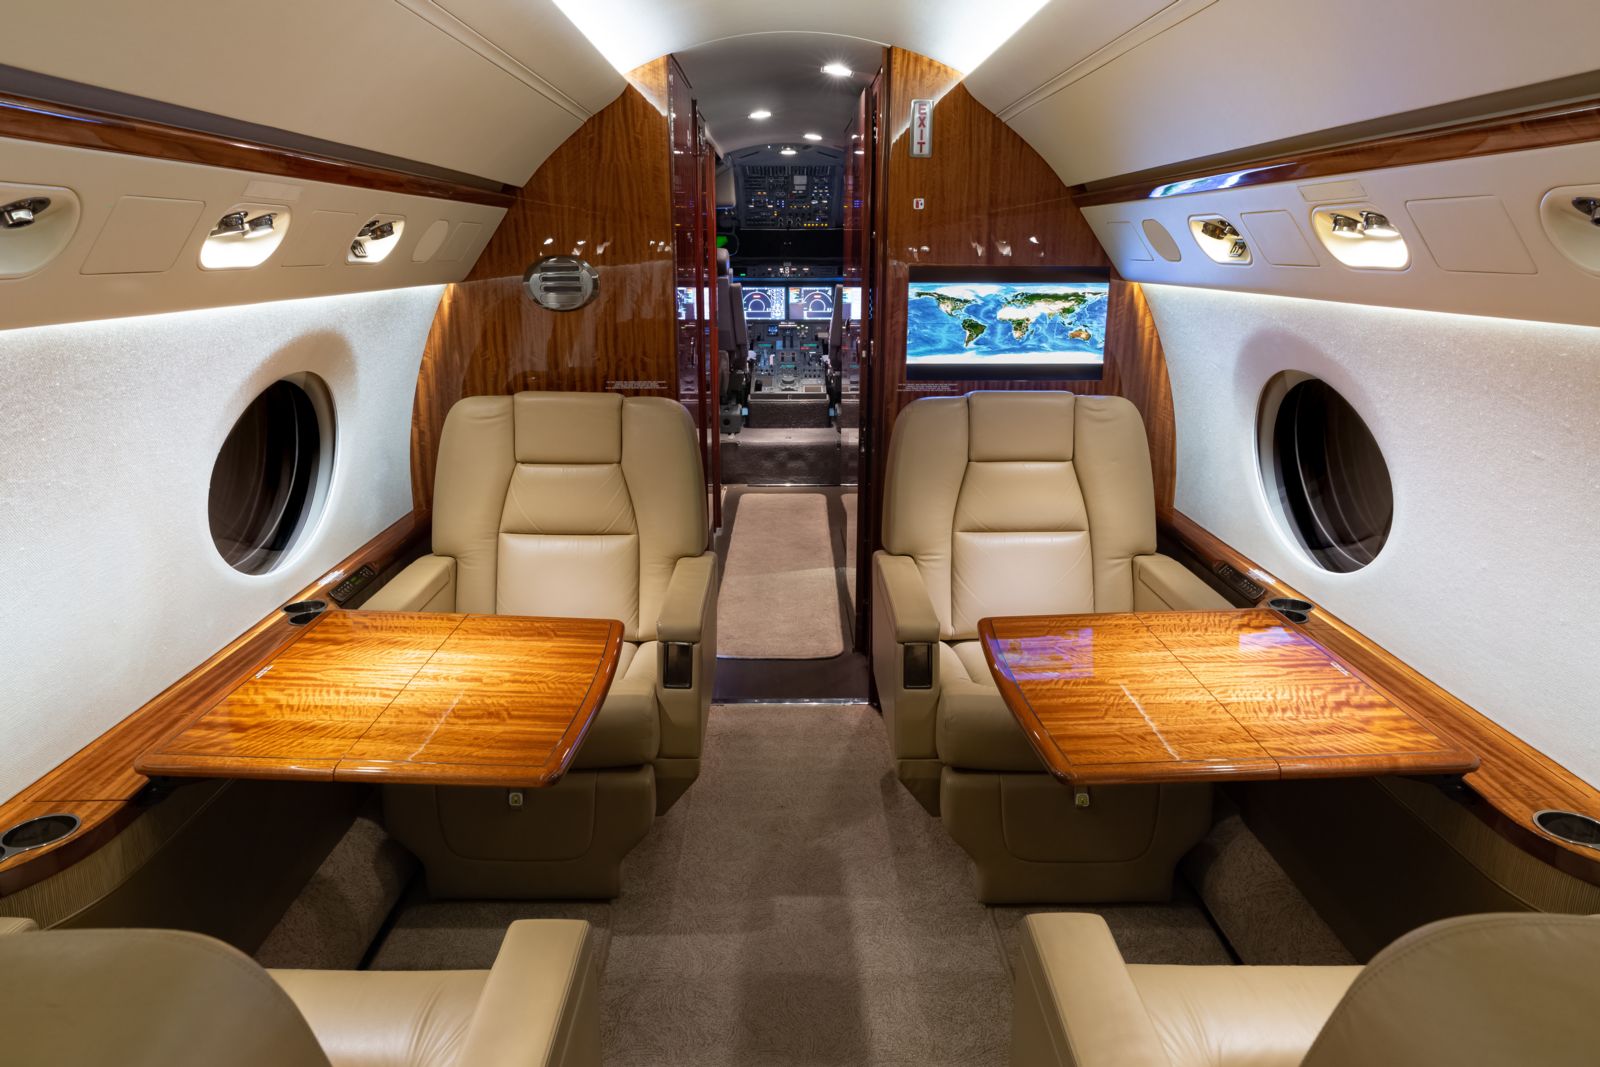 Gulfstream G550  S/N 5403 for sale | gallery image: /userfiles/images/G550_sn5403/fwd%20fwd.jpg